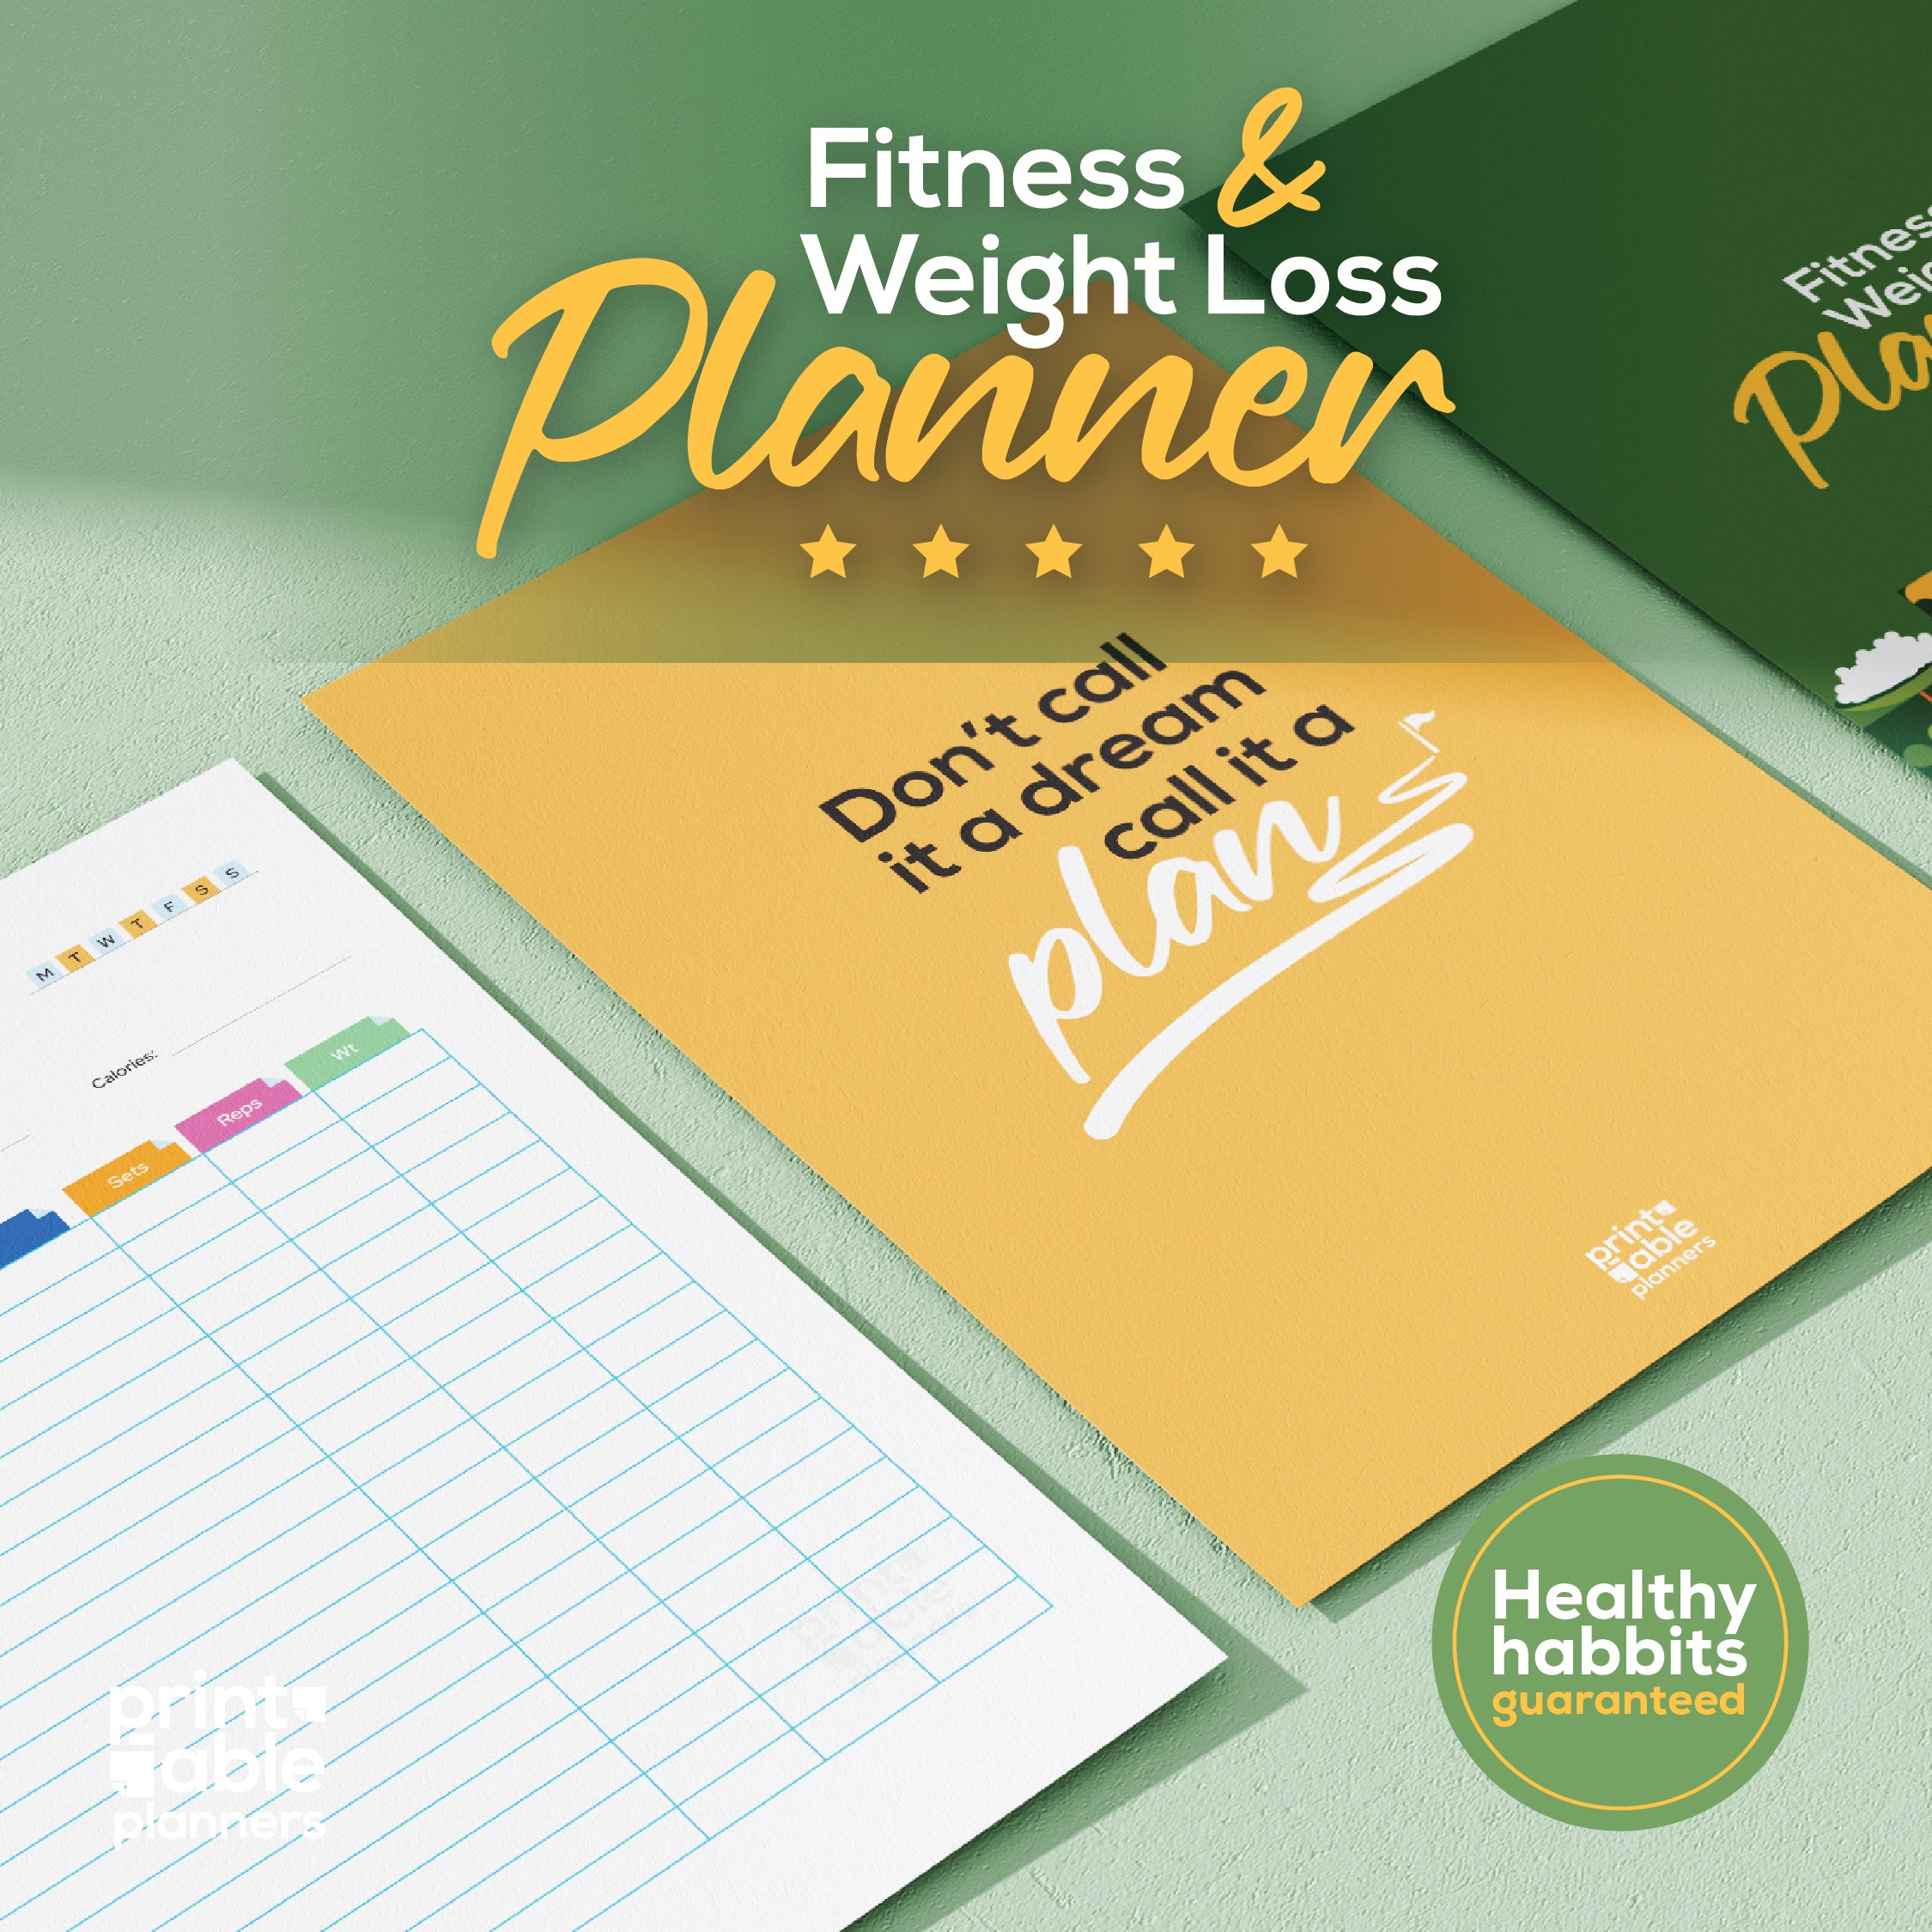 Fitness Journal | Fitness Planner | Body Measurements | Fitness Program Template | Digital Workout Planner | Increases Energy